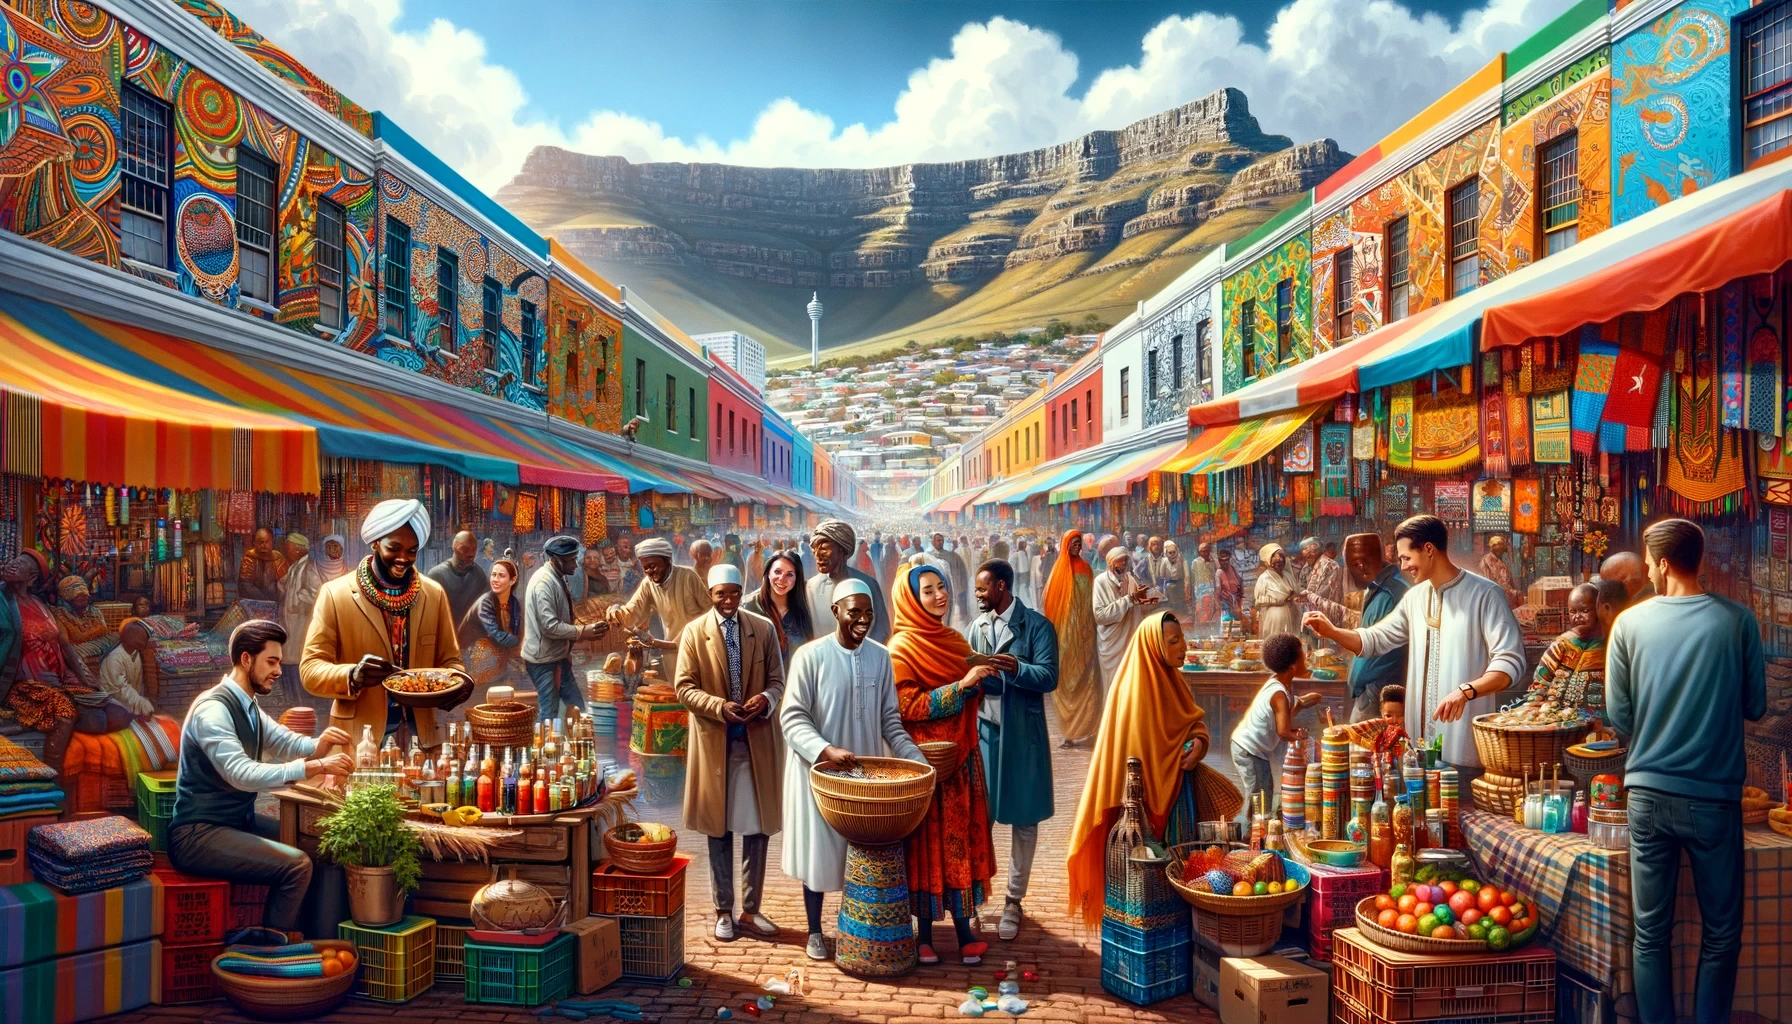 A vibrant and culturally rich image of Khayelitsha, Cape Town